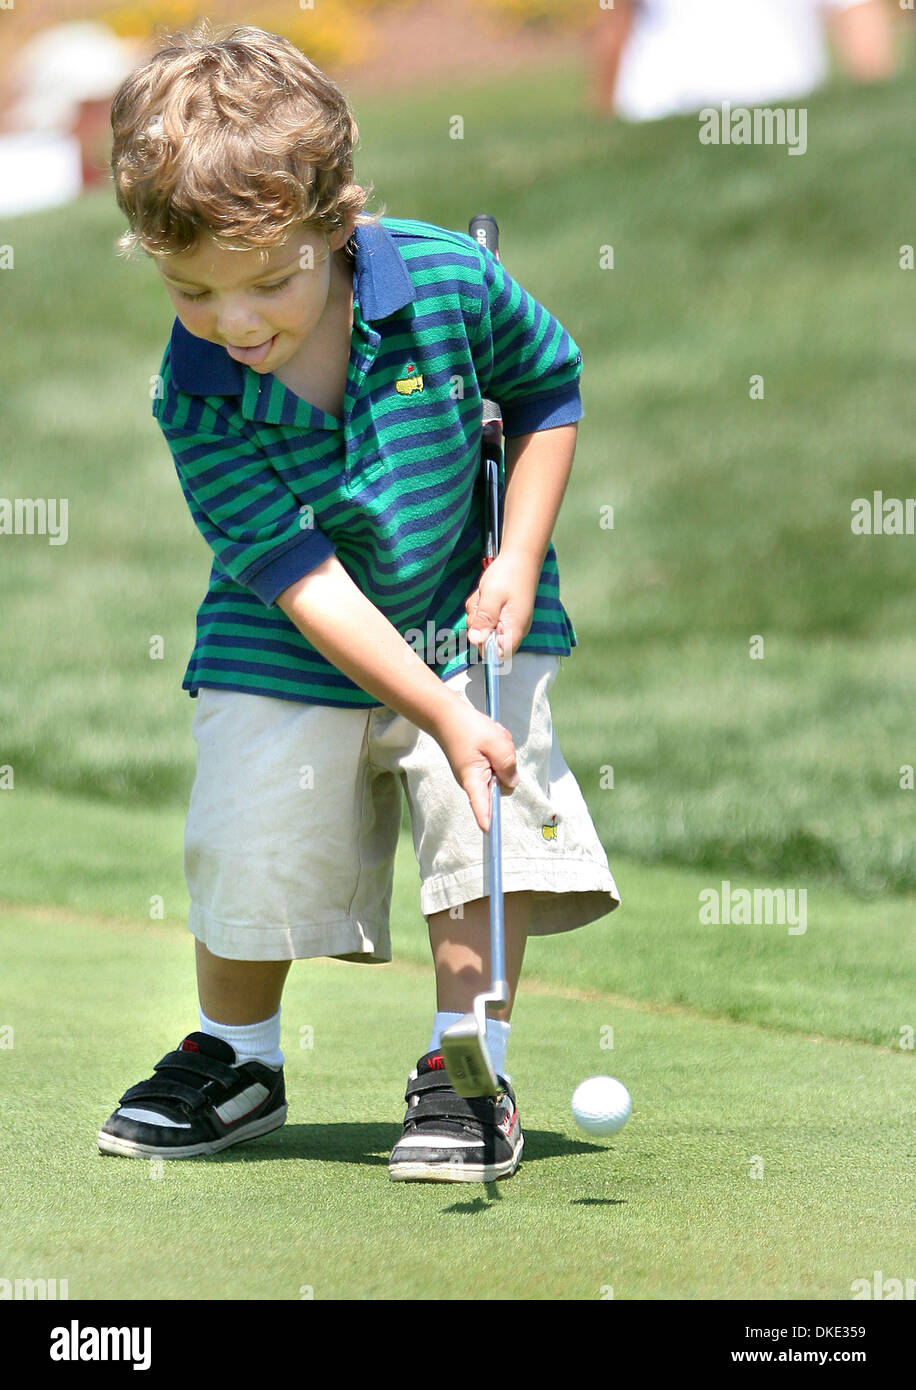 Jul 28, 2007 - Carlsbad, CA, USA - KEVIN STALLINGS, 3, of Carlsbad, works on his putting game during the Community Open House event at The Crossings at Carlsbad, a new municipal golf course.  (Credit Image: © Sean DuFrene/SDU-T/ZUMA Press) RESTRICTIONS:  LA and Orange County Papers RIGHTS OUT! and USA Tabloid RIGHTS OUT! Stock Photo